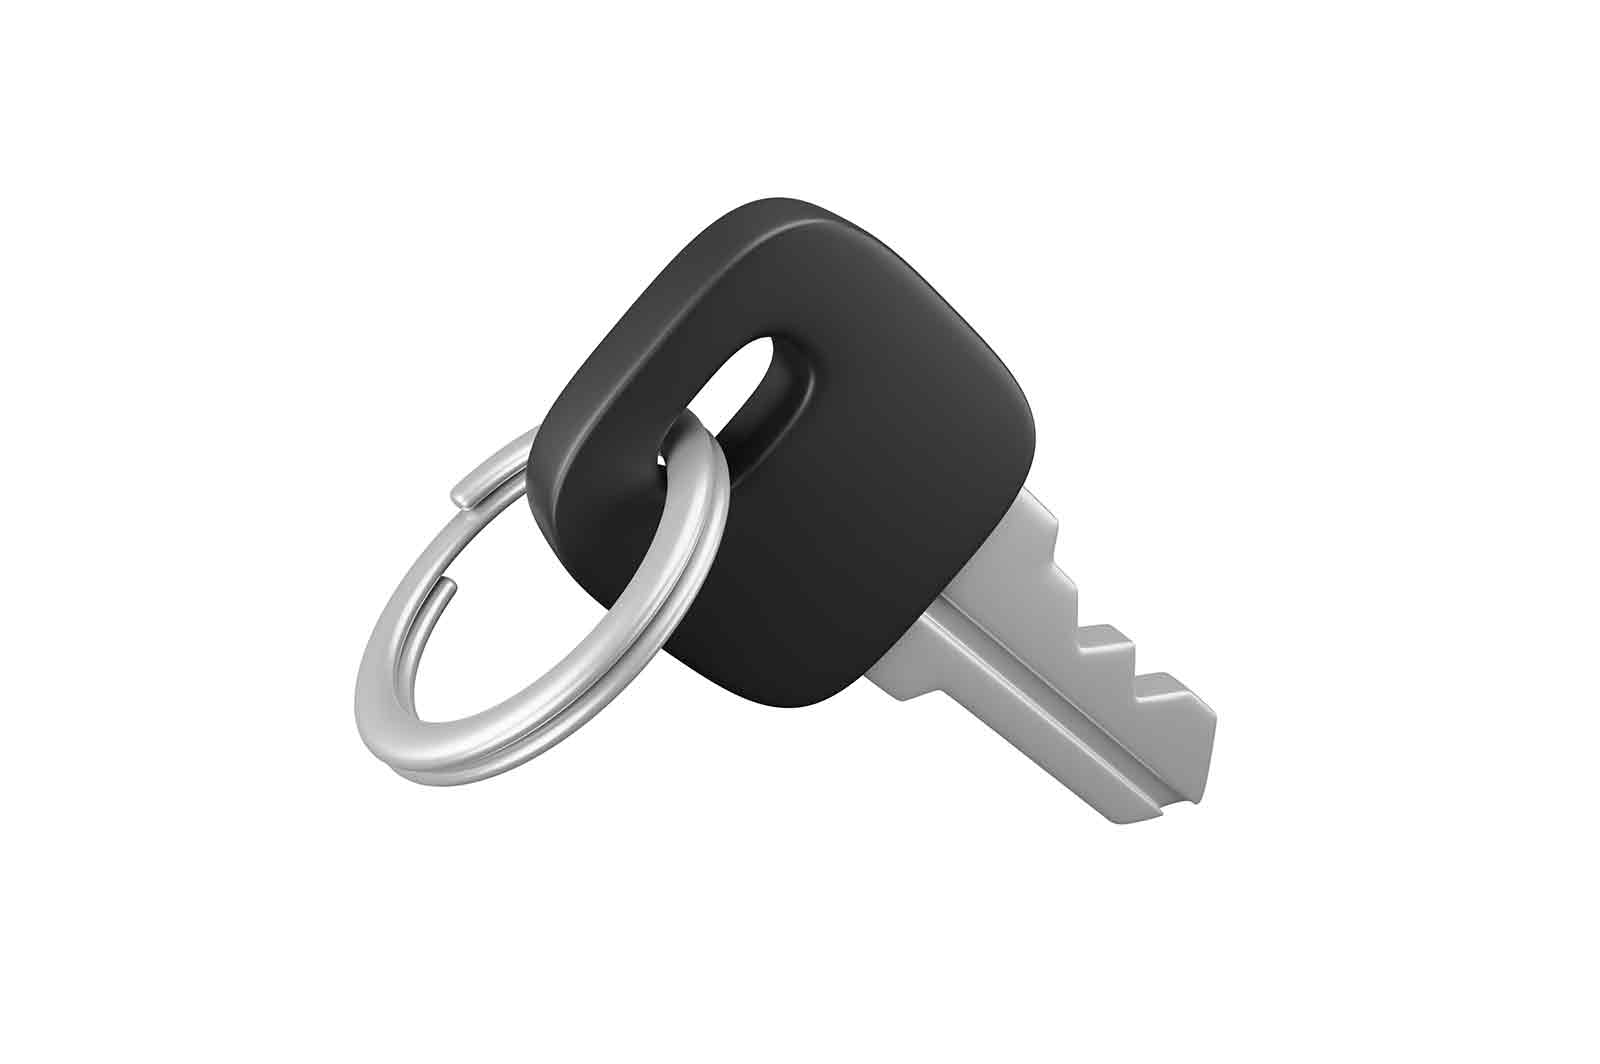 Private or digital key icon, protection and security sign 3d rendered illustration. Access to information, username or personal account 3d isometric